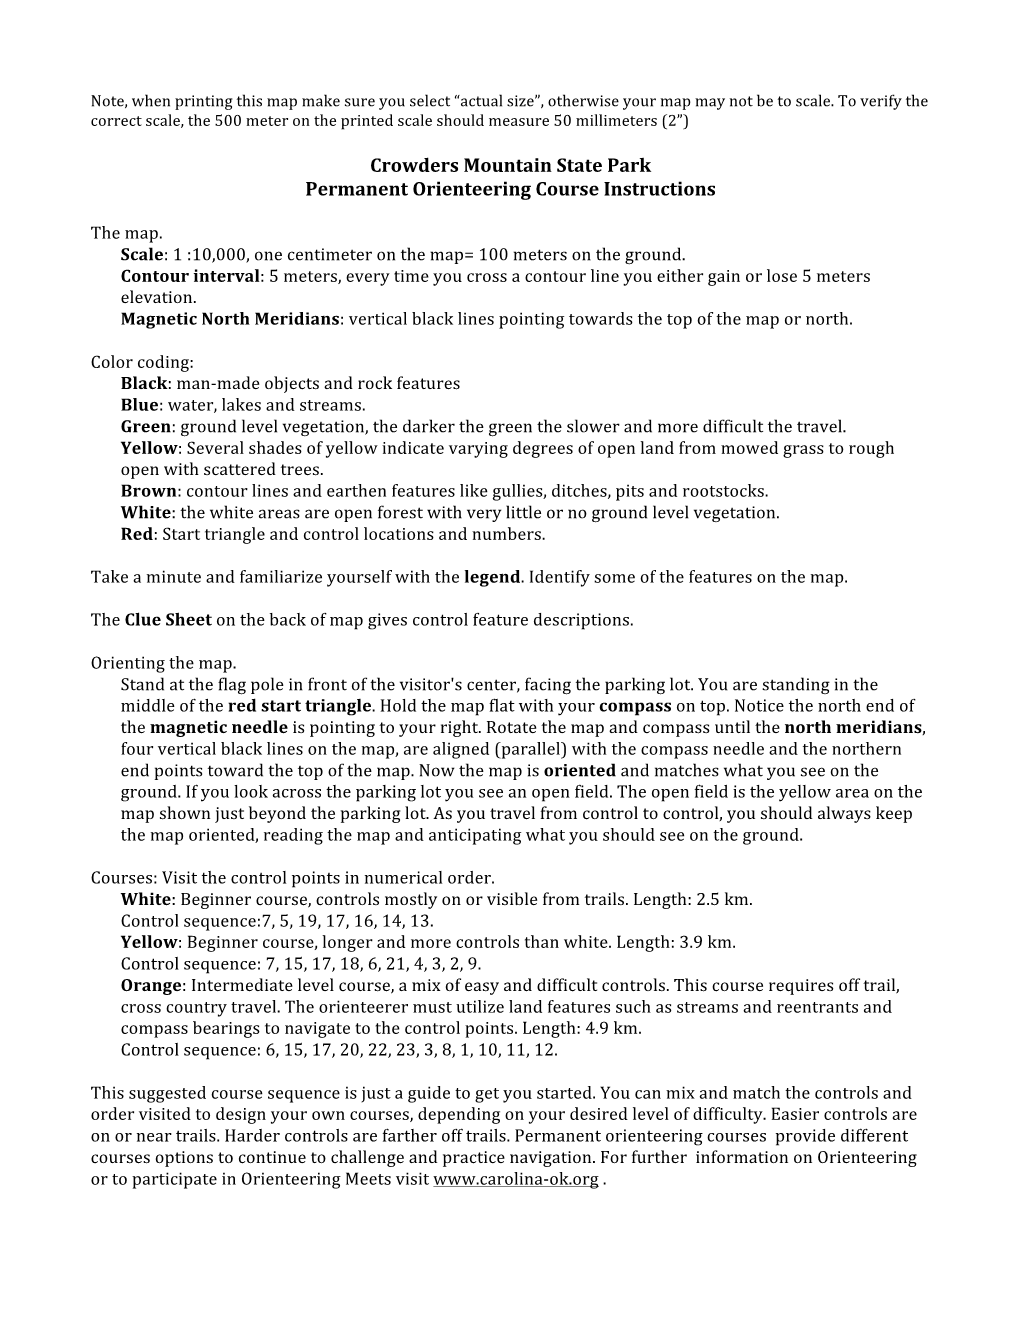 Crowders Mountain State Park Permanent Orienteering Course Instructions